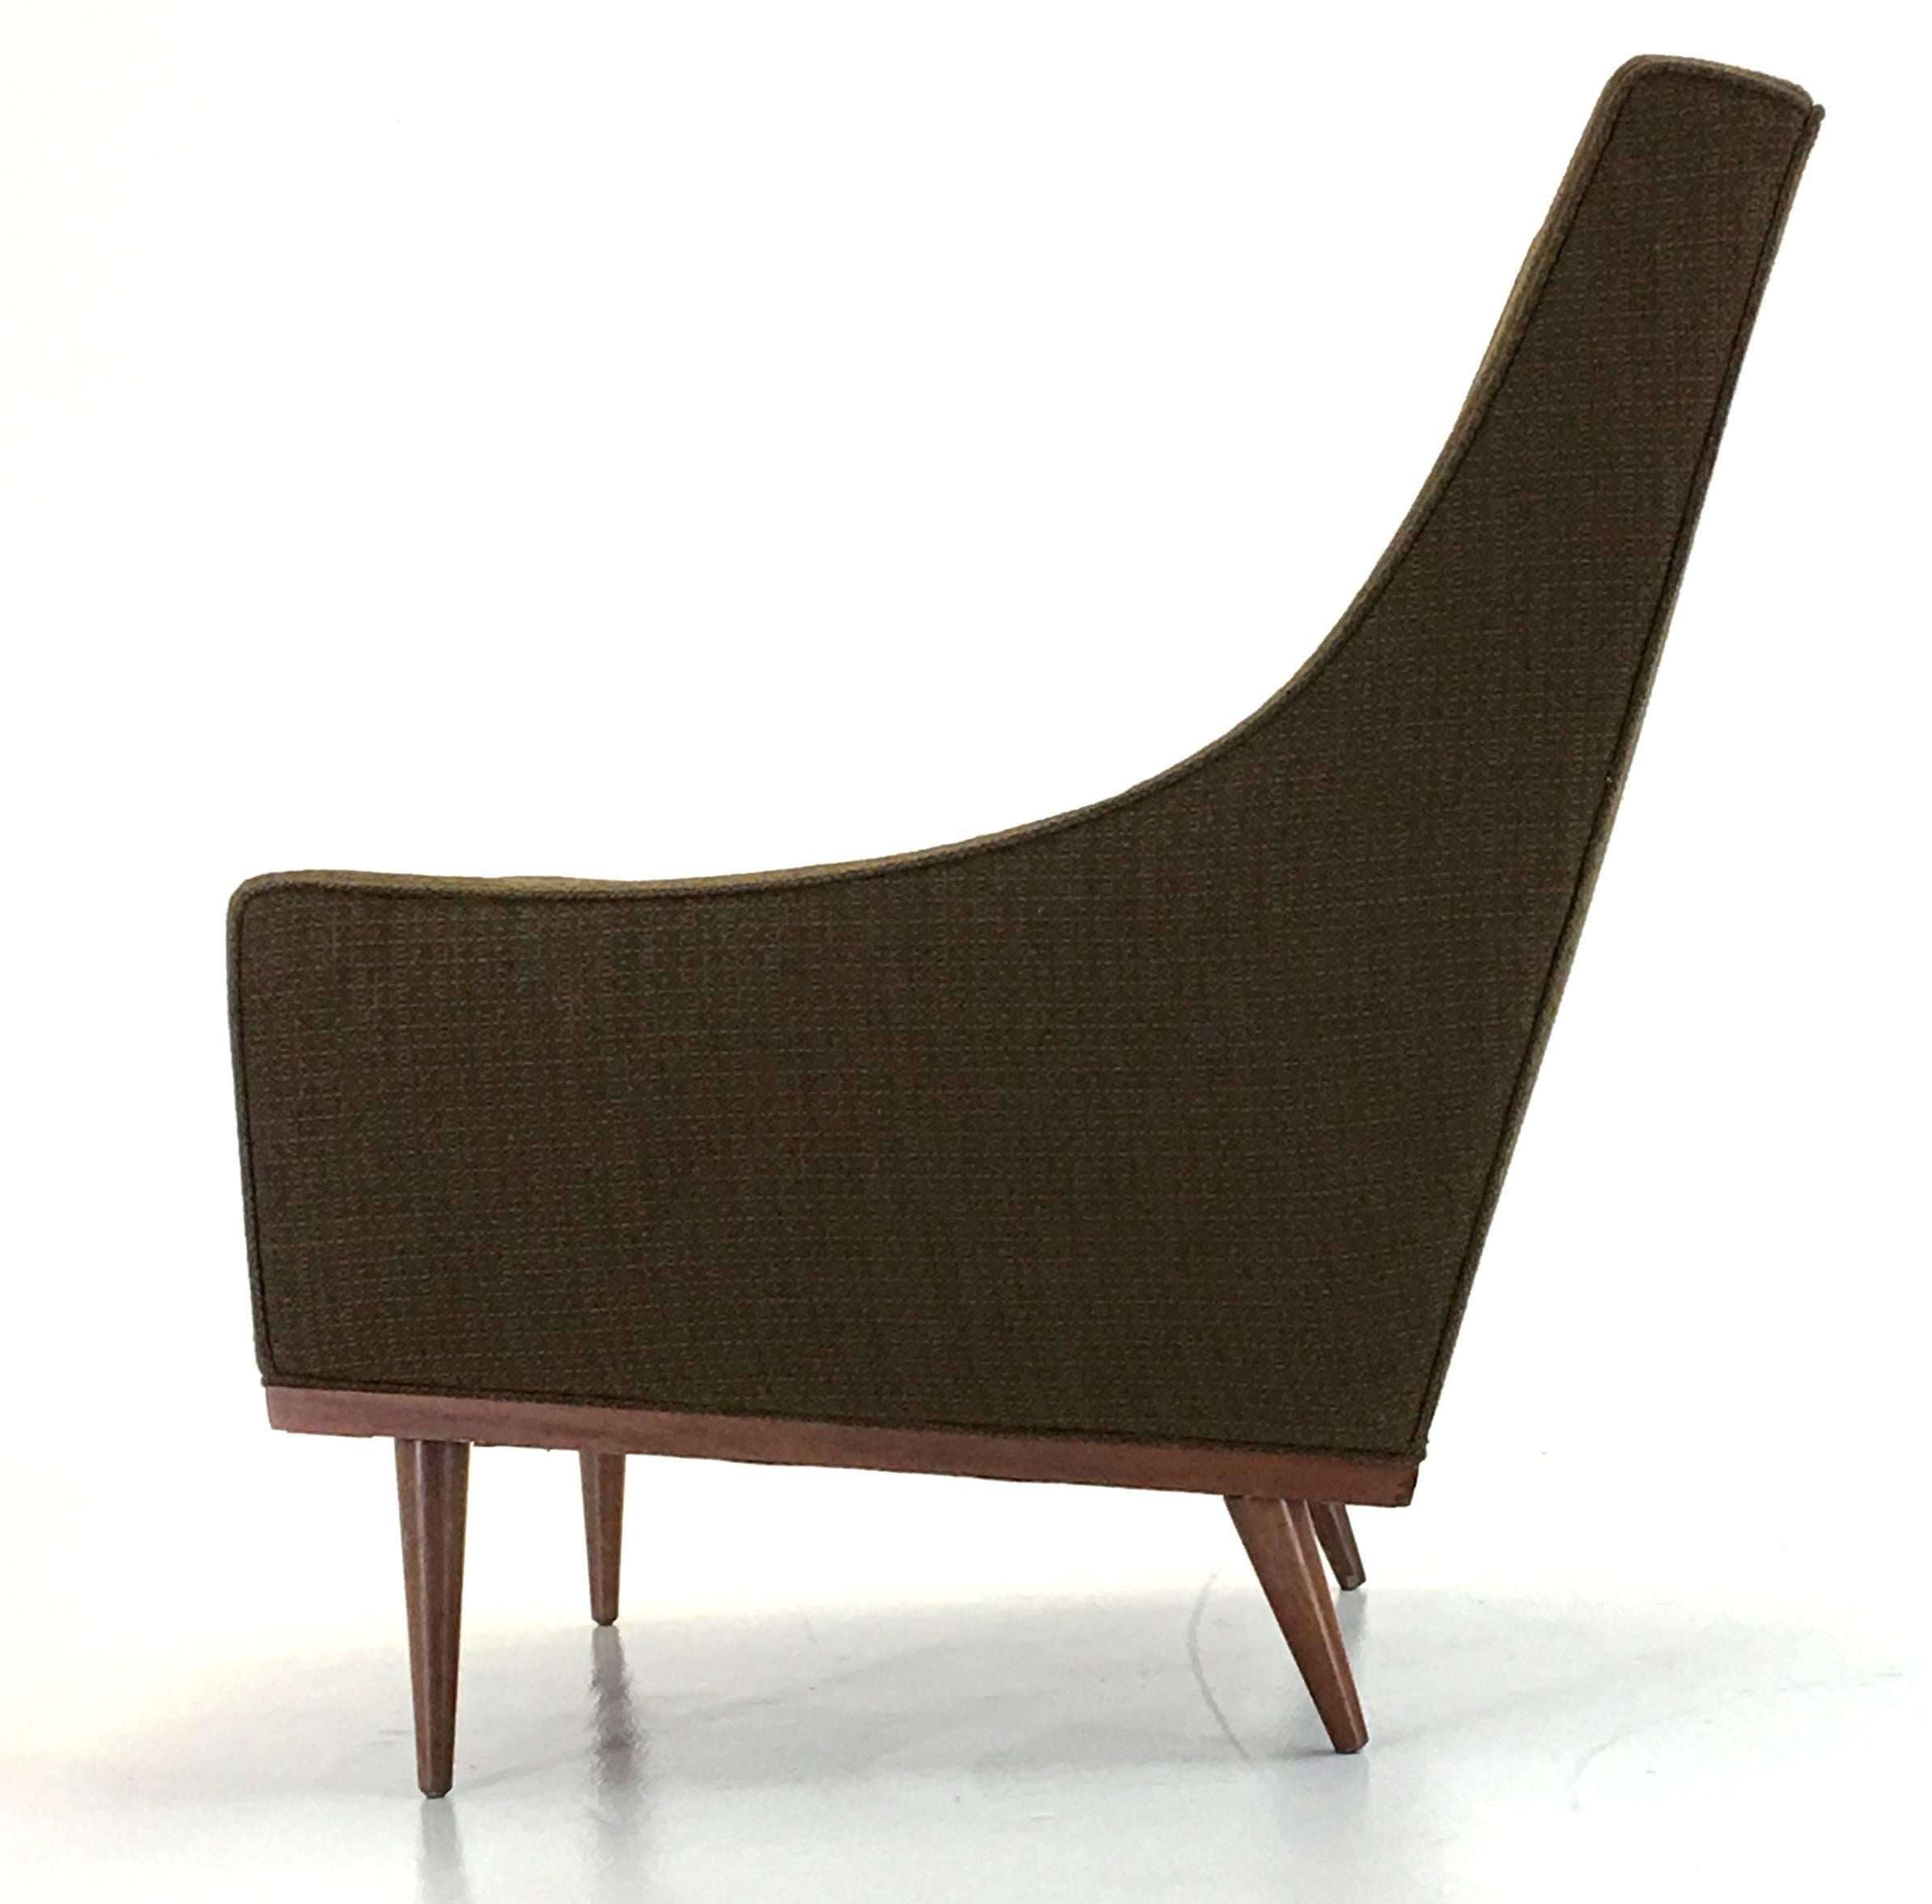 James Inc, 1967, USA, Milo Baughman. Measures: 36 tall x 27 wide and 34.5 inches deep
Model 654, Articulate Seating series. Unique scoop /sloped arm model.
Arms graduate from 20 inches at the front to the back rest.
Seat height is 15.5